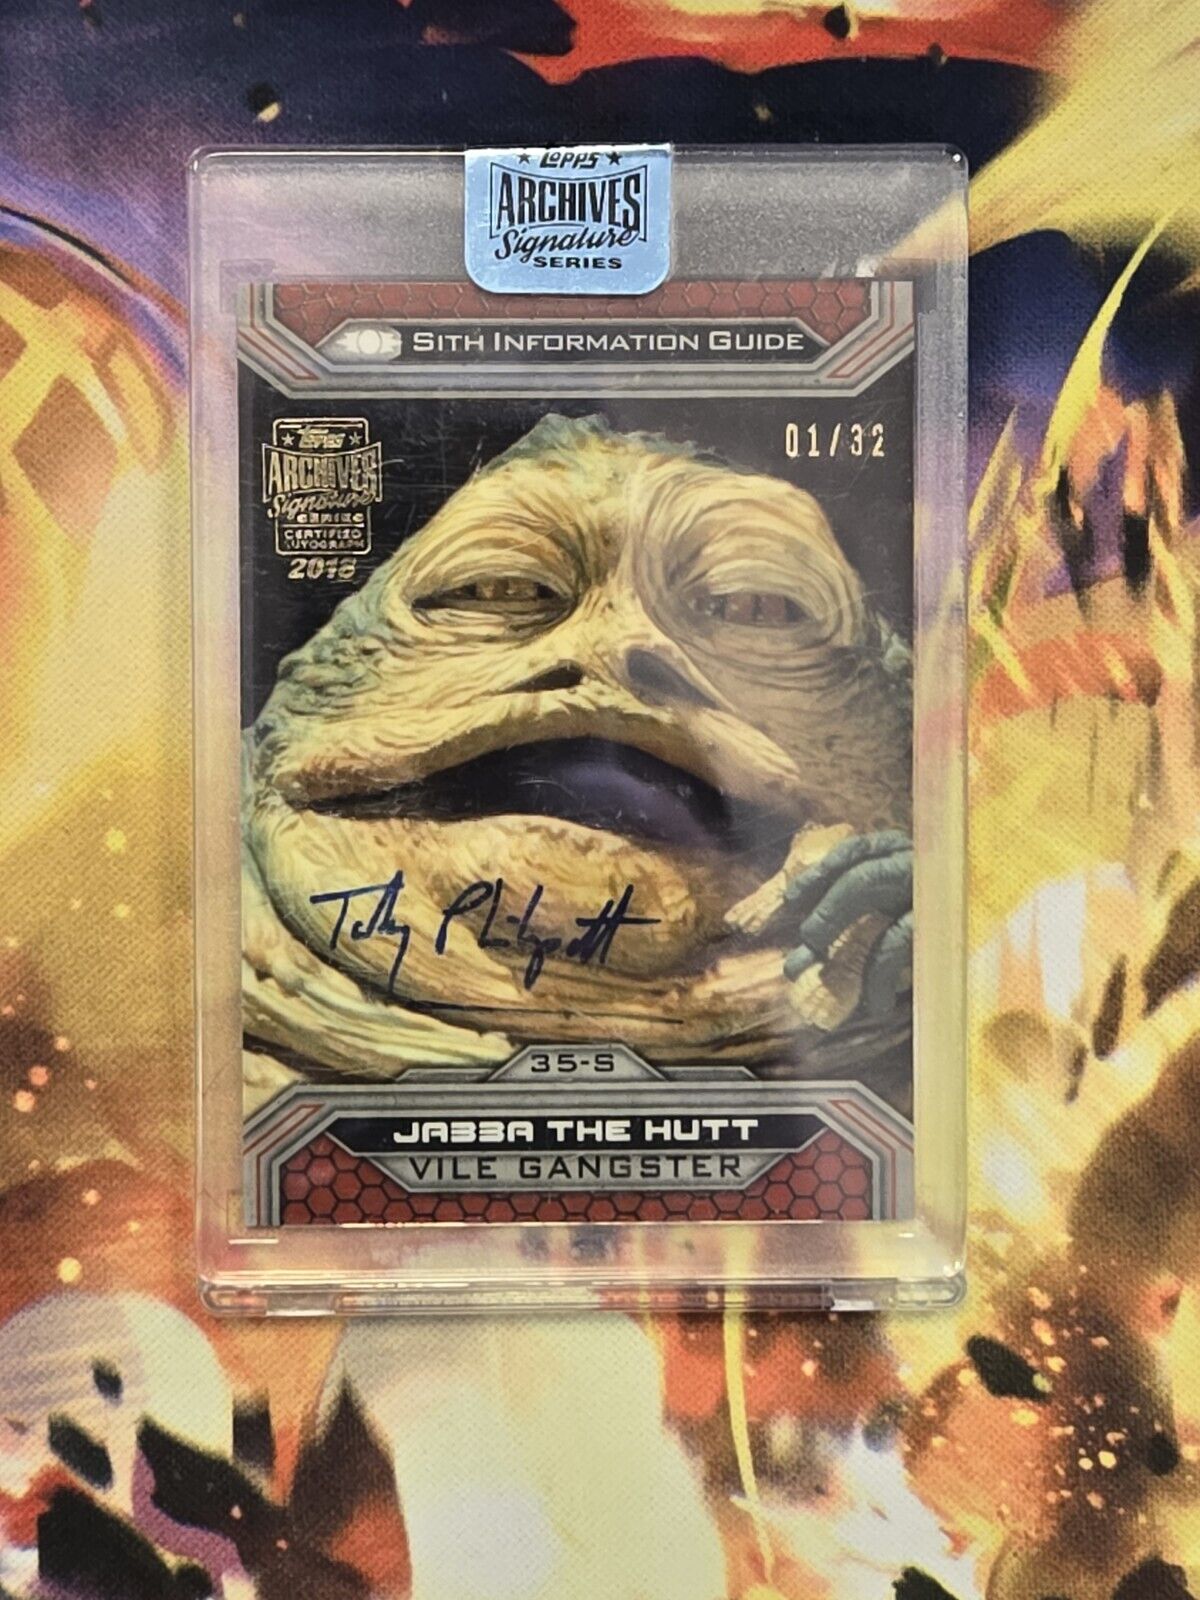 2018 Topps Star Wars Jabba The Hutt Archives Signature Series #01/32 